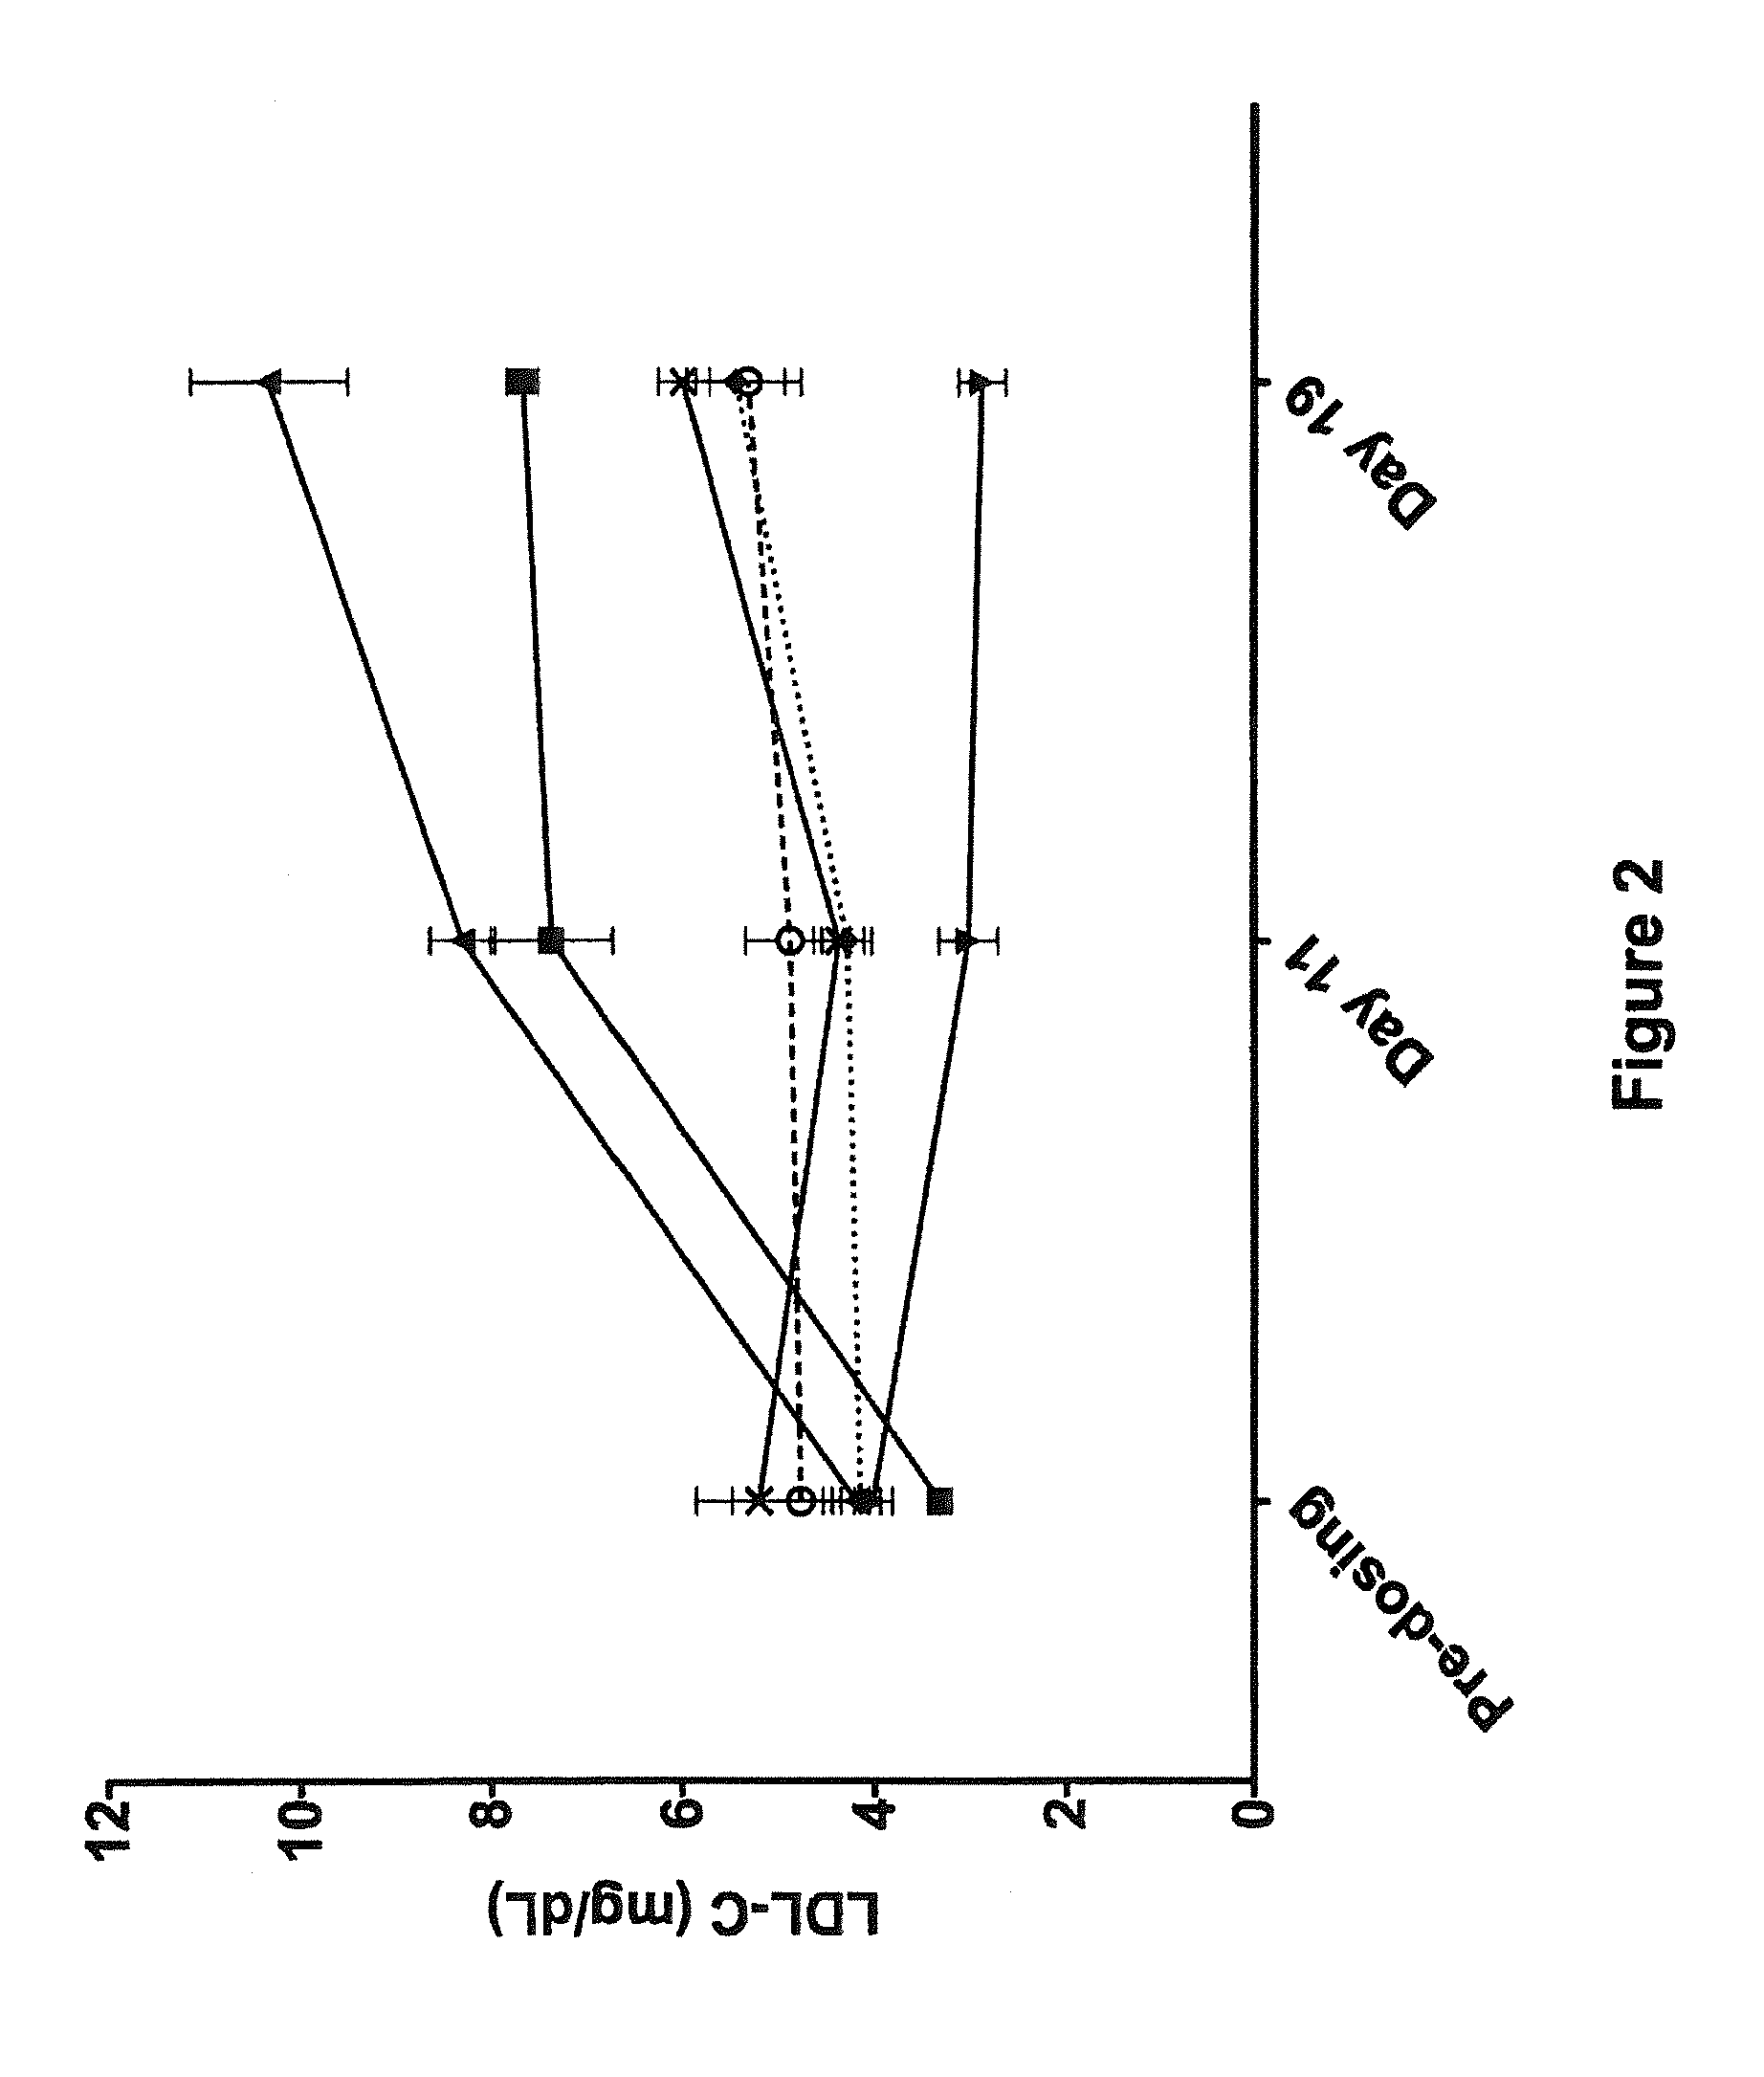 Method of reducing the severity of stress hyperglycemia with human antibodies to the glucagon receptor